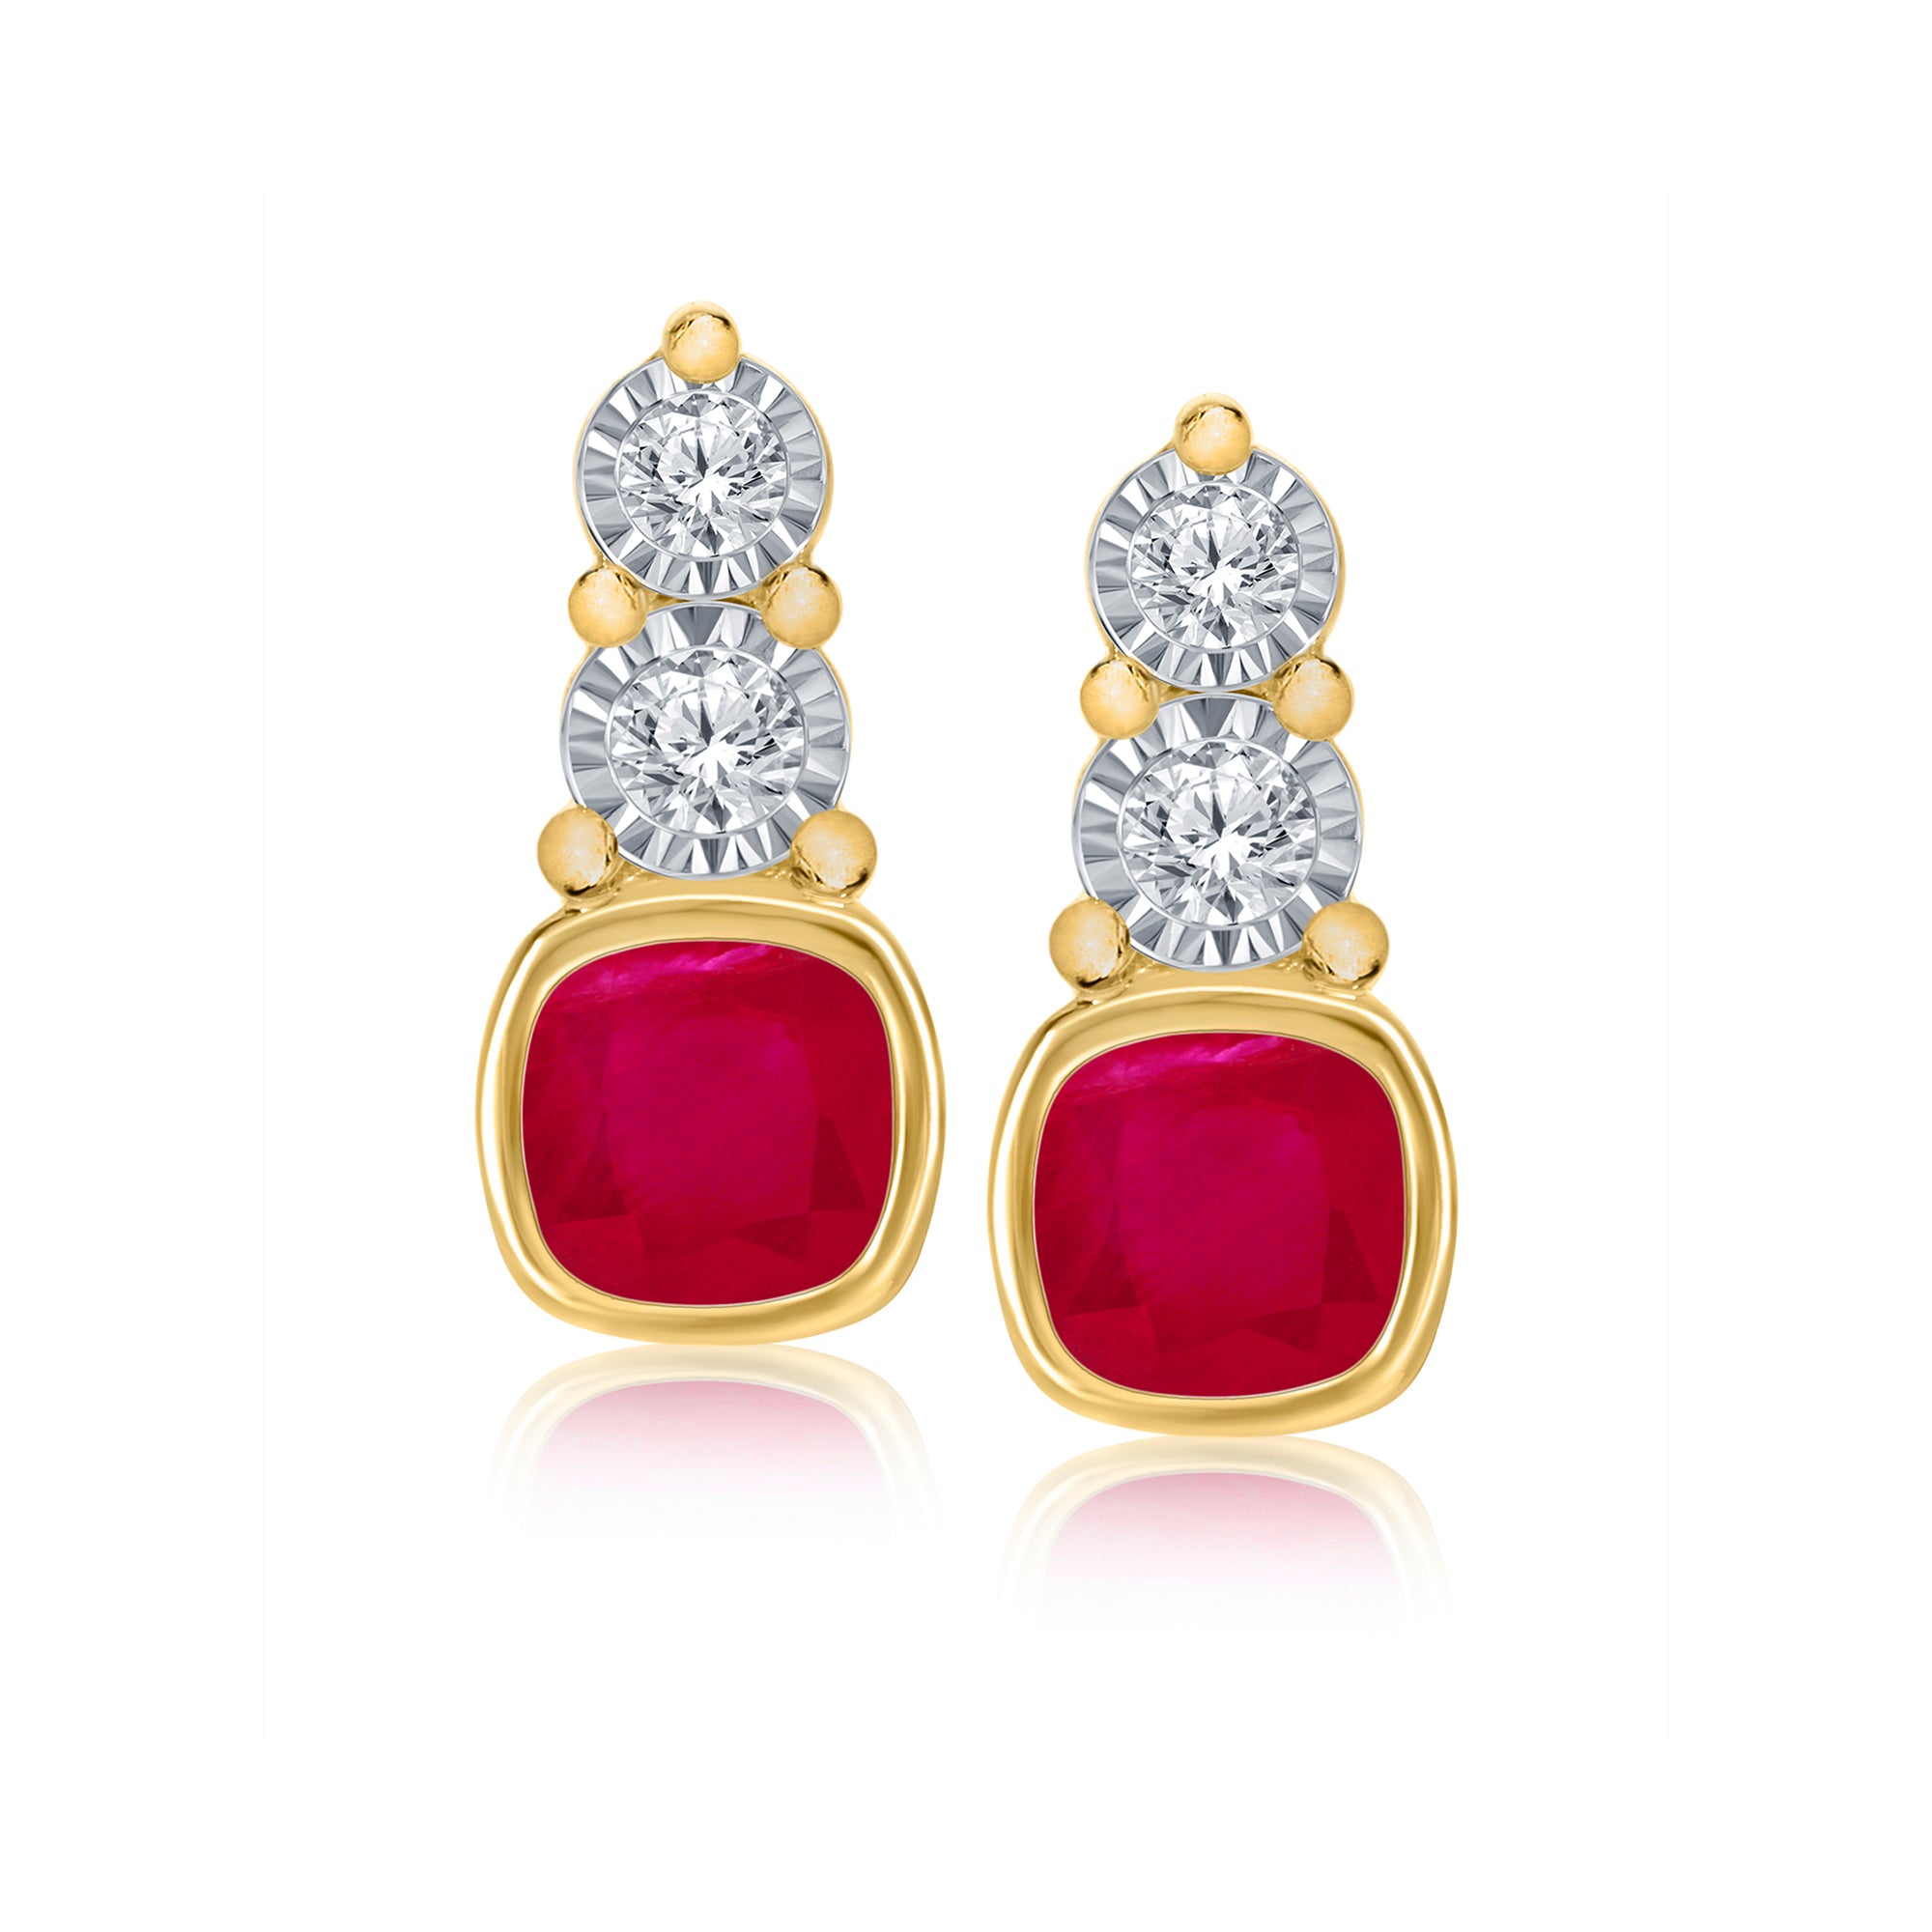 9ct gold 4mm cushion shape ruby & miracle plate diamond studs earrings 0.06ct